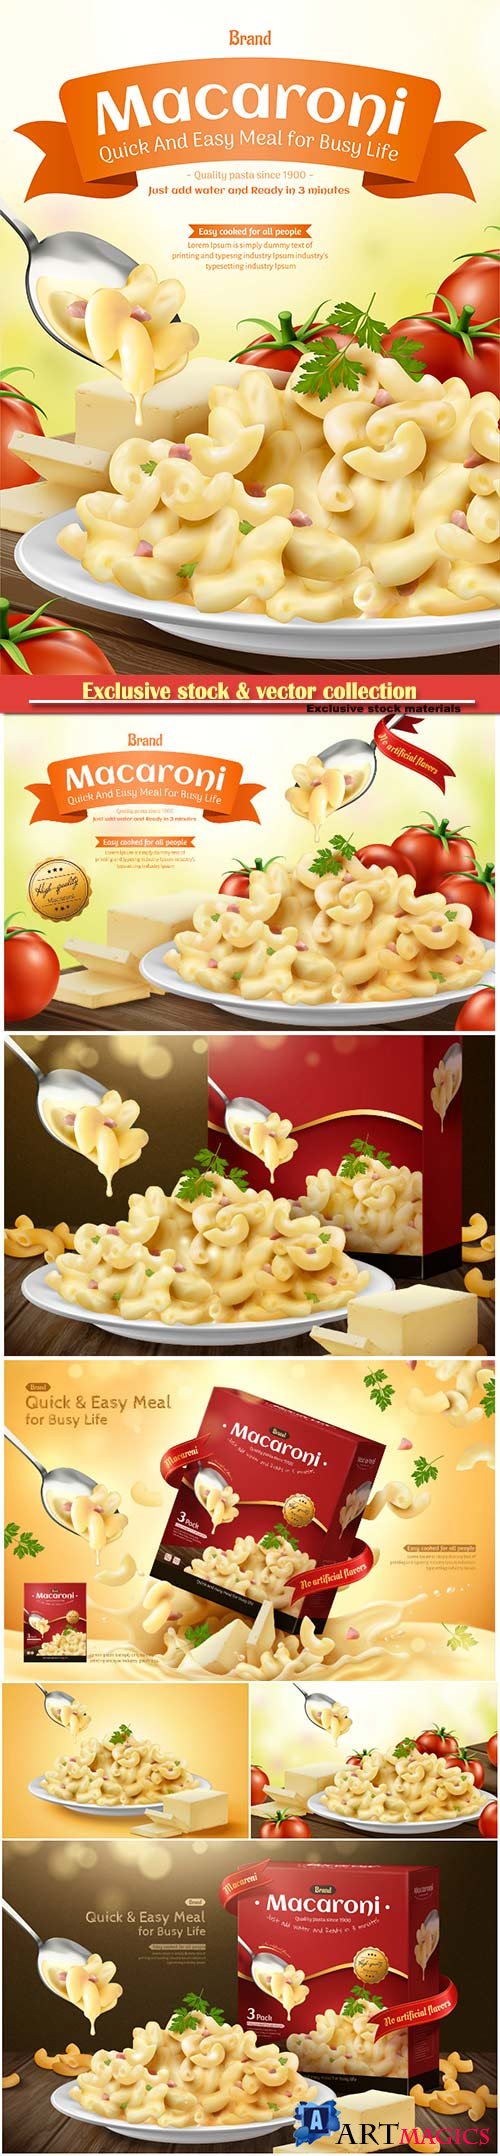 Delicious macaroni ads with cheese sauce and tomatoesin 3d illustration